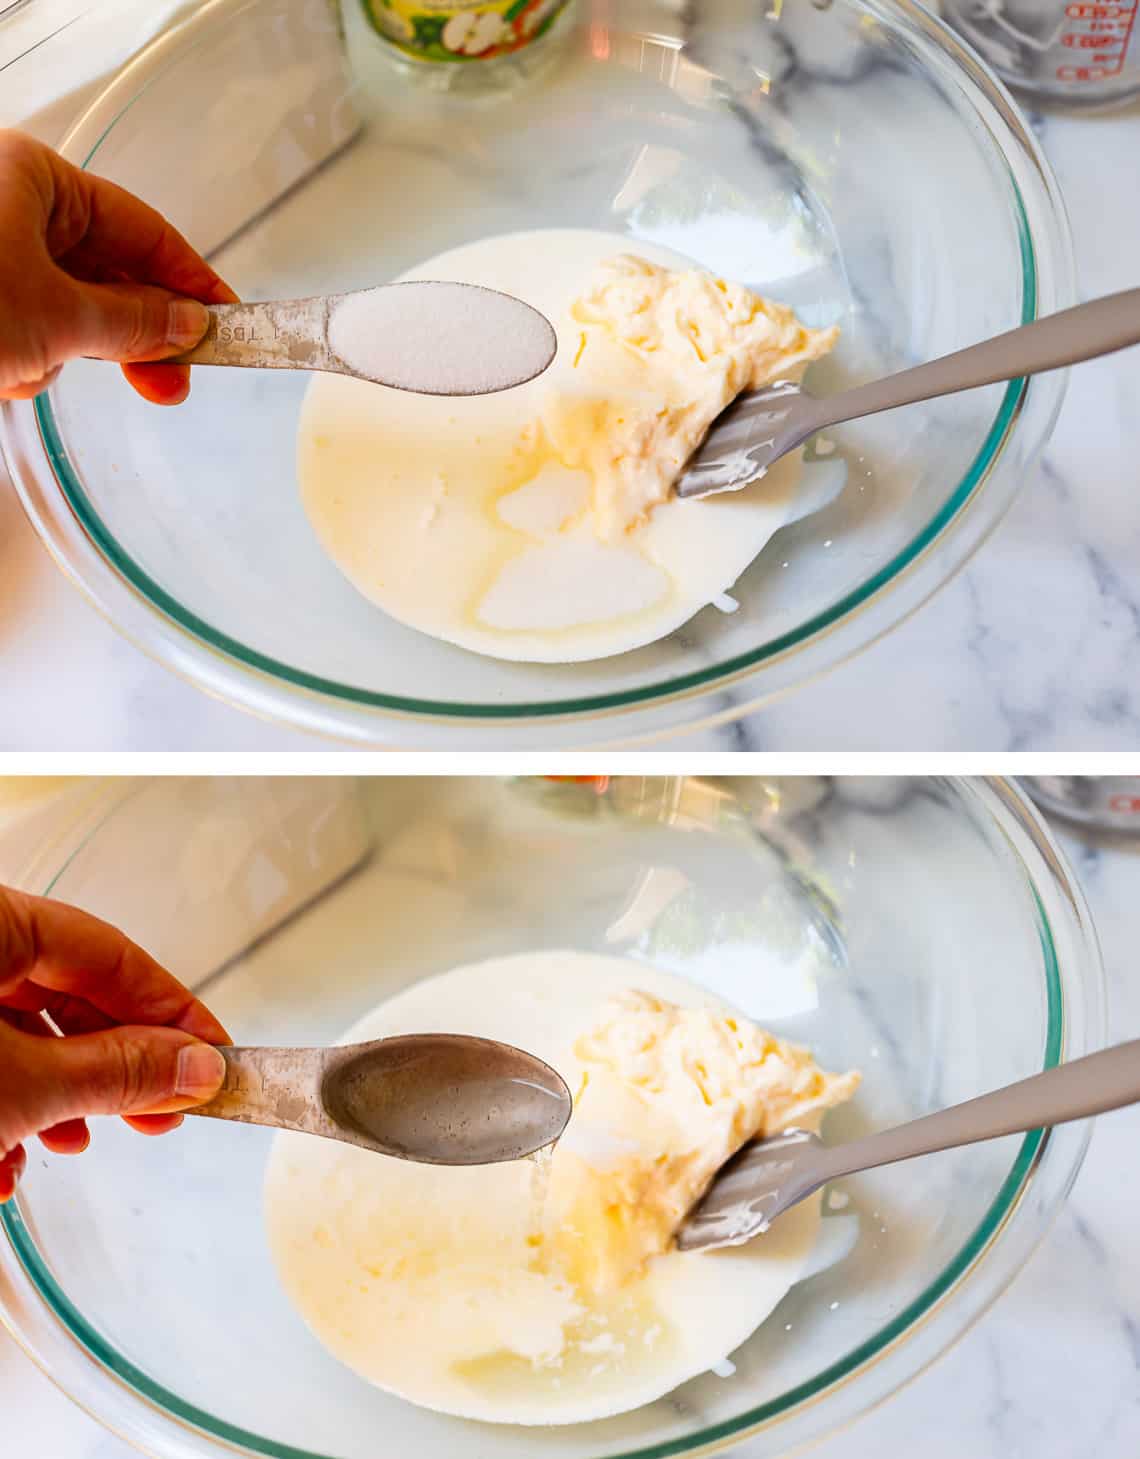 Adding sugar and vinegar to creamy sauce in large glass bowl.